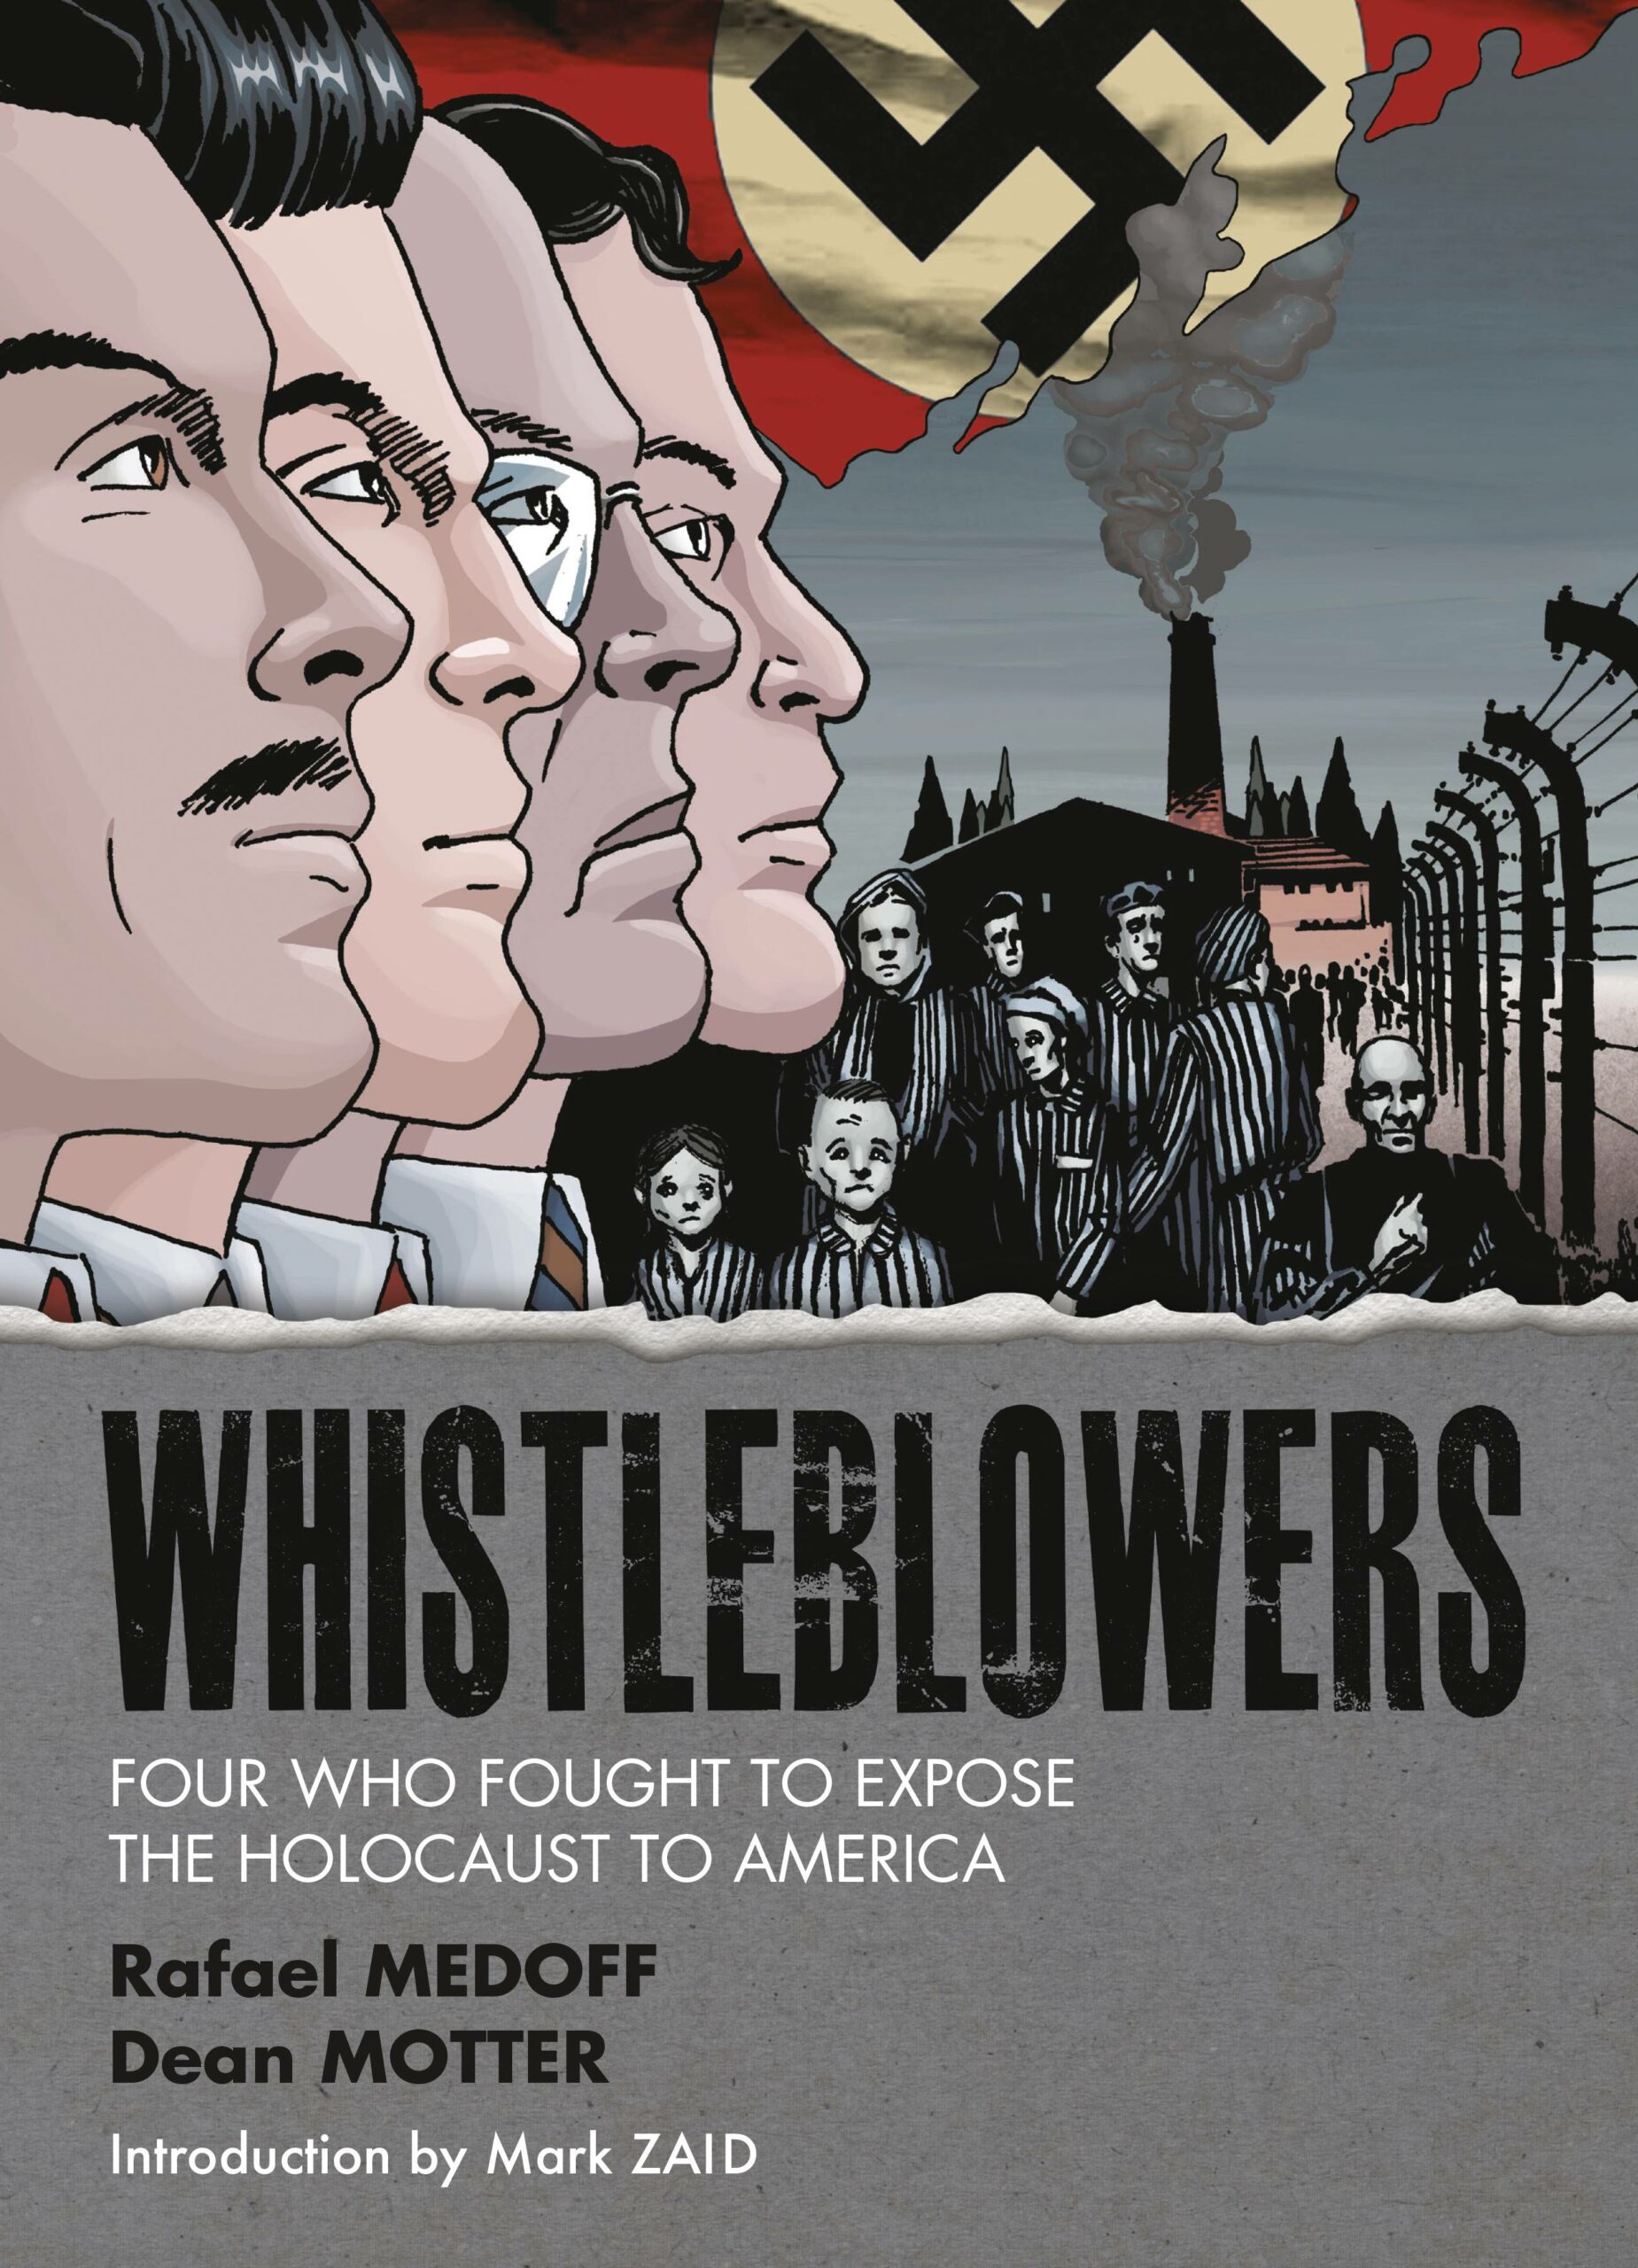 WHISTLEBLOWERS FOUR WHO FOUGHT TO EXPOSE HOLOCAUST TP